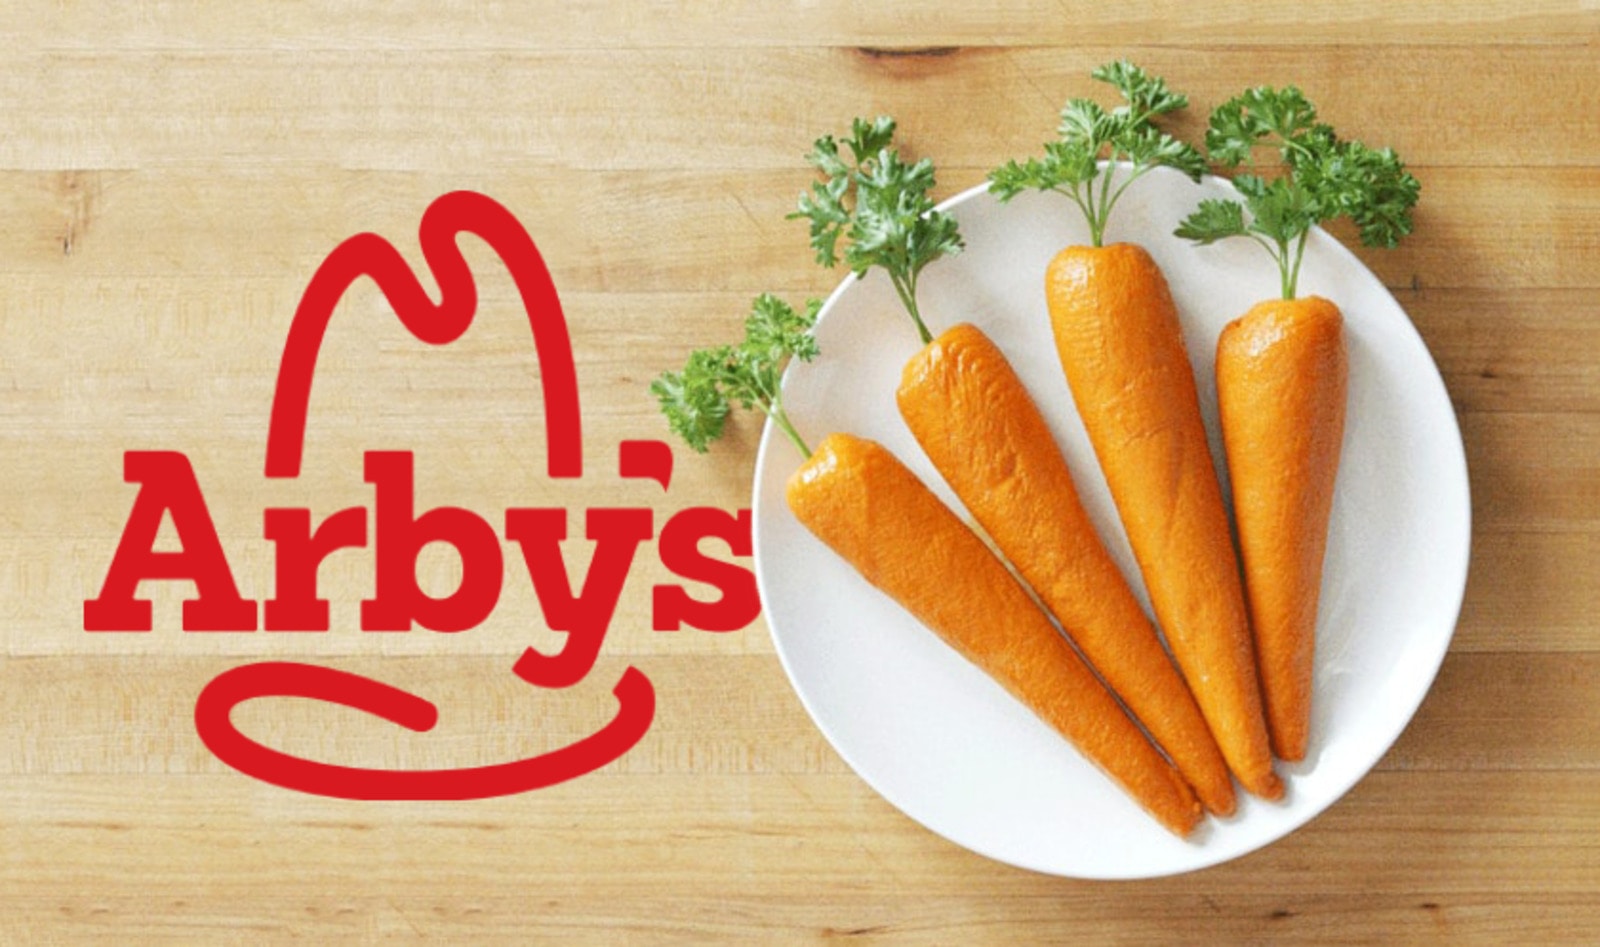 Arby’s Debuts “Meat-Based Vegetables” and Social Media is Not Having It